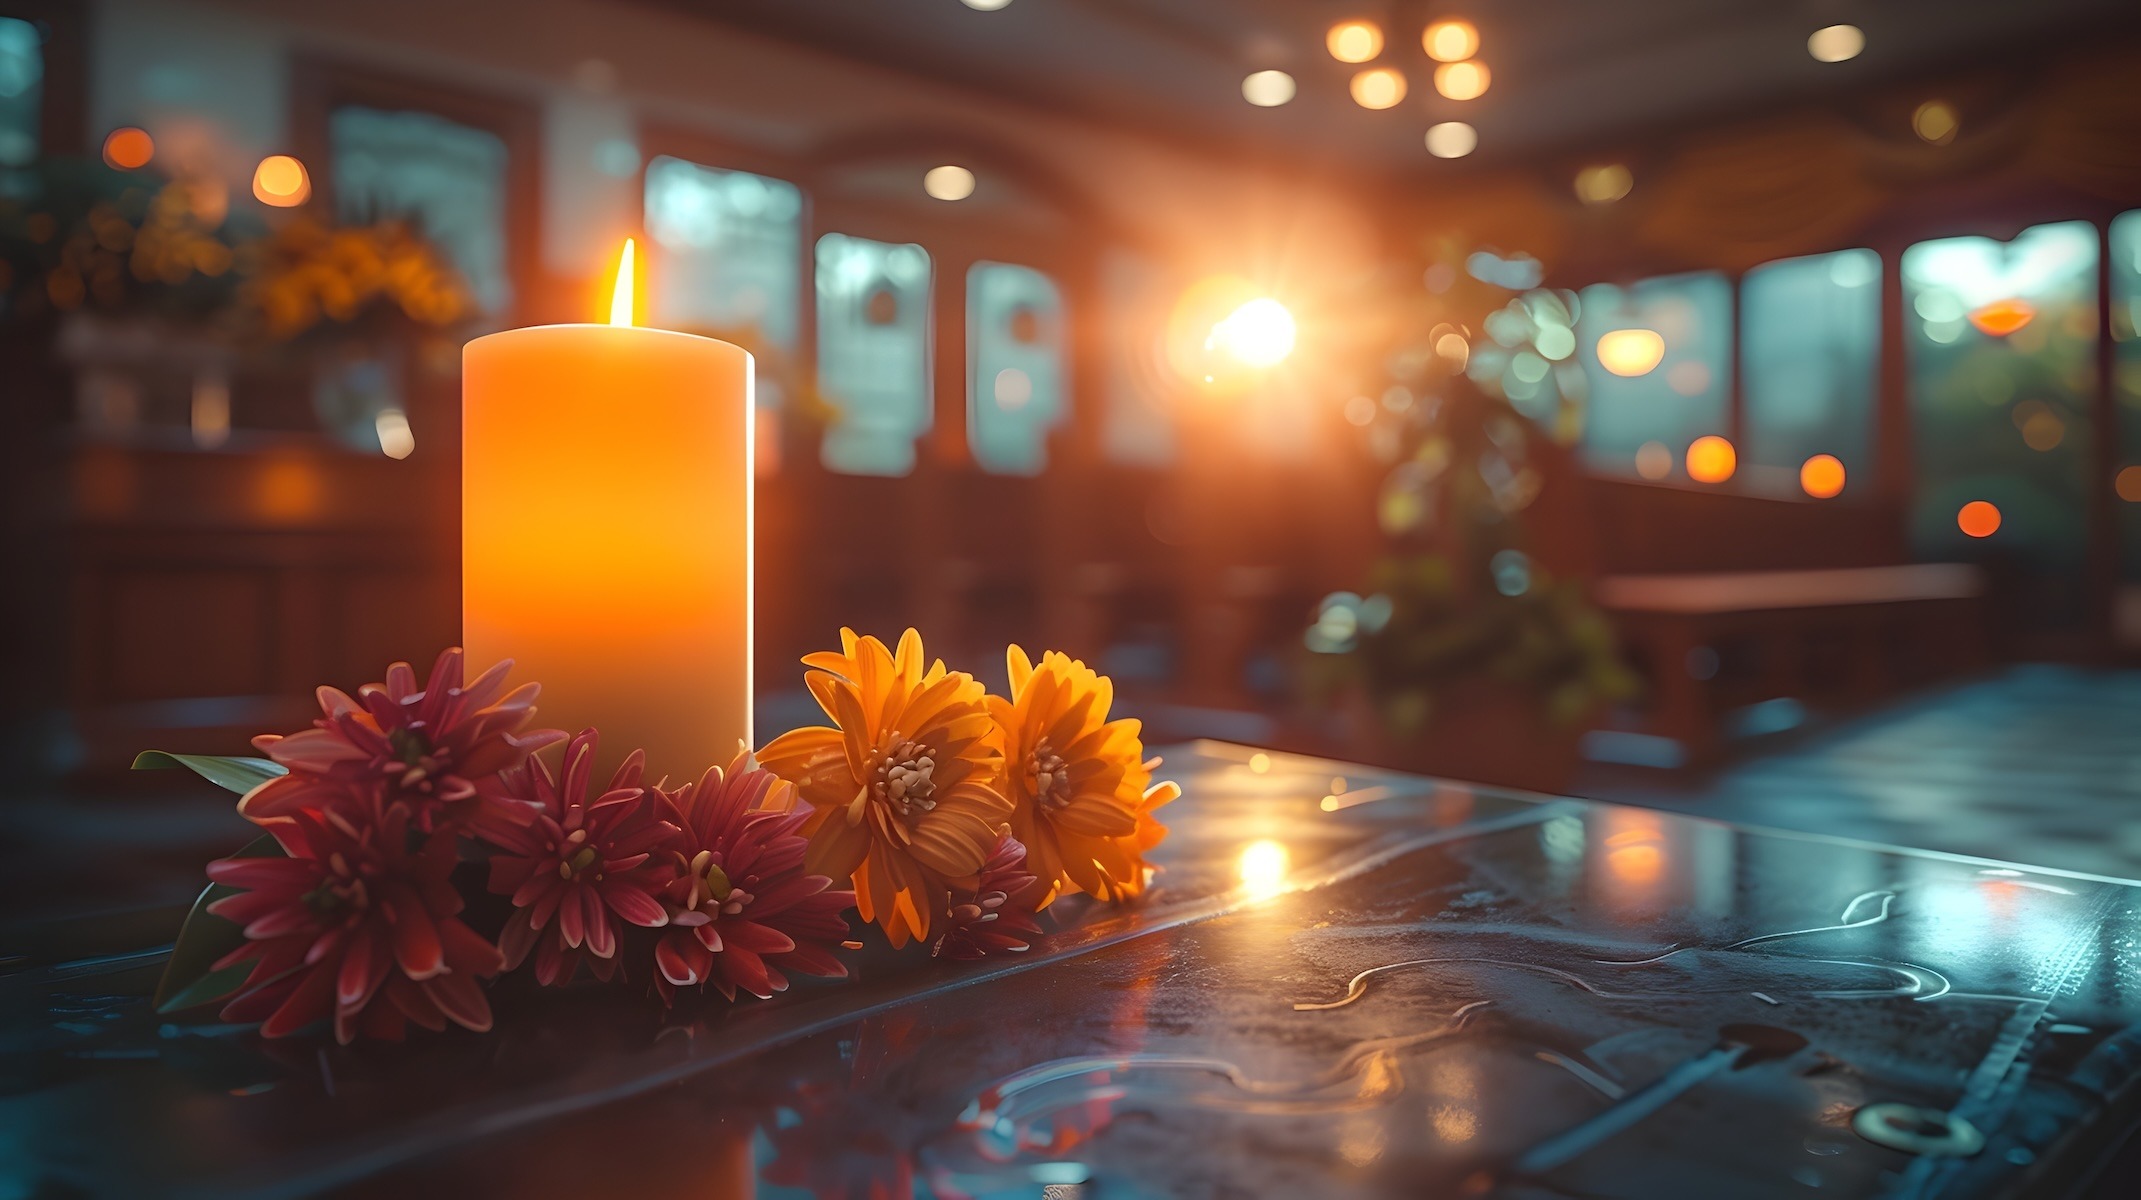 Estate Planning. Funeral arrangements and organ donation. A dark and serene image of a lit candle with flowers at the bottom in the foreground on a desk. Behind it in the blurred background is a bright light behind several rows of benches.